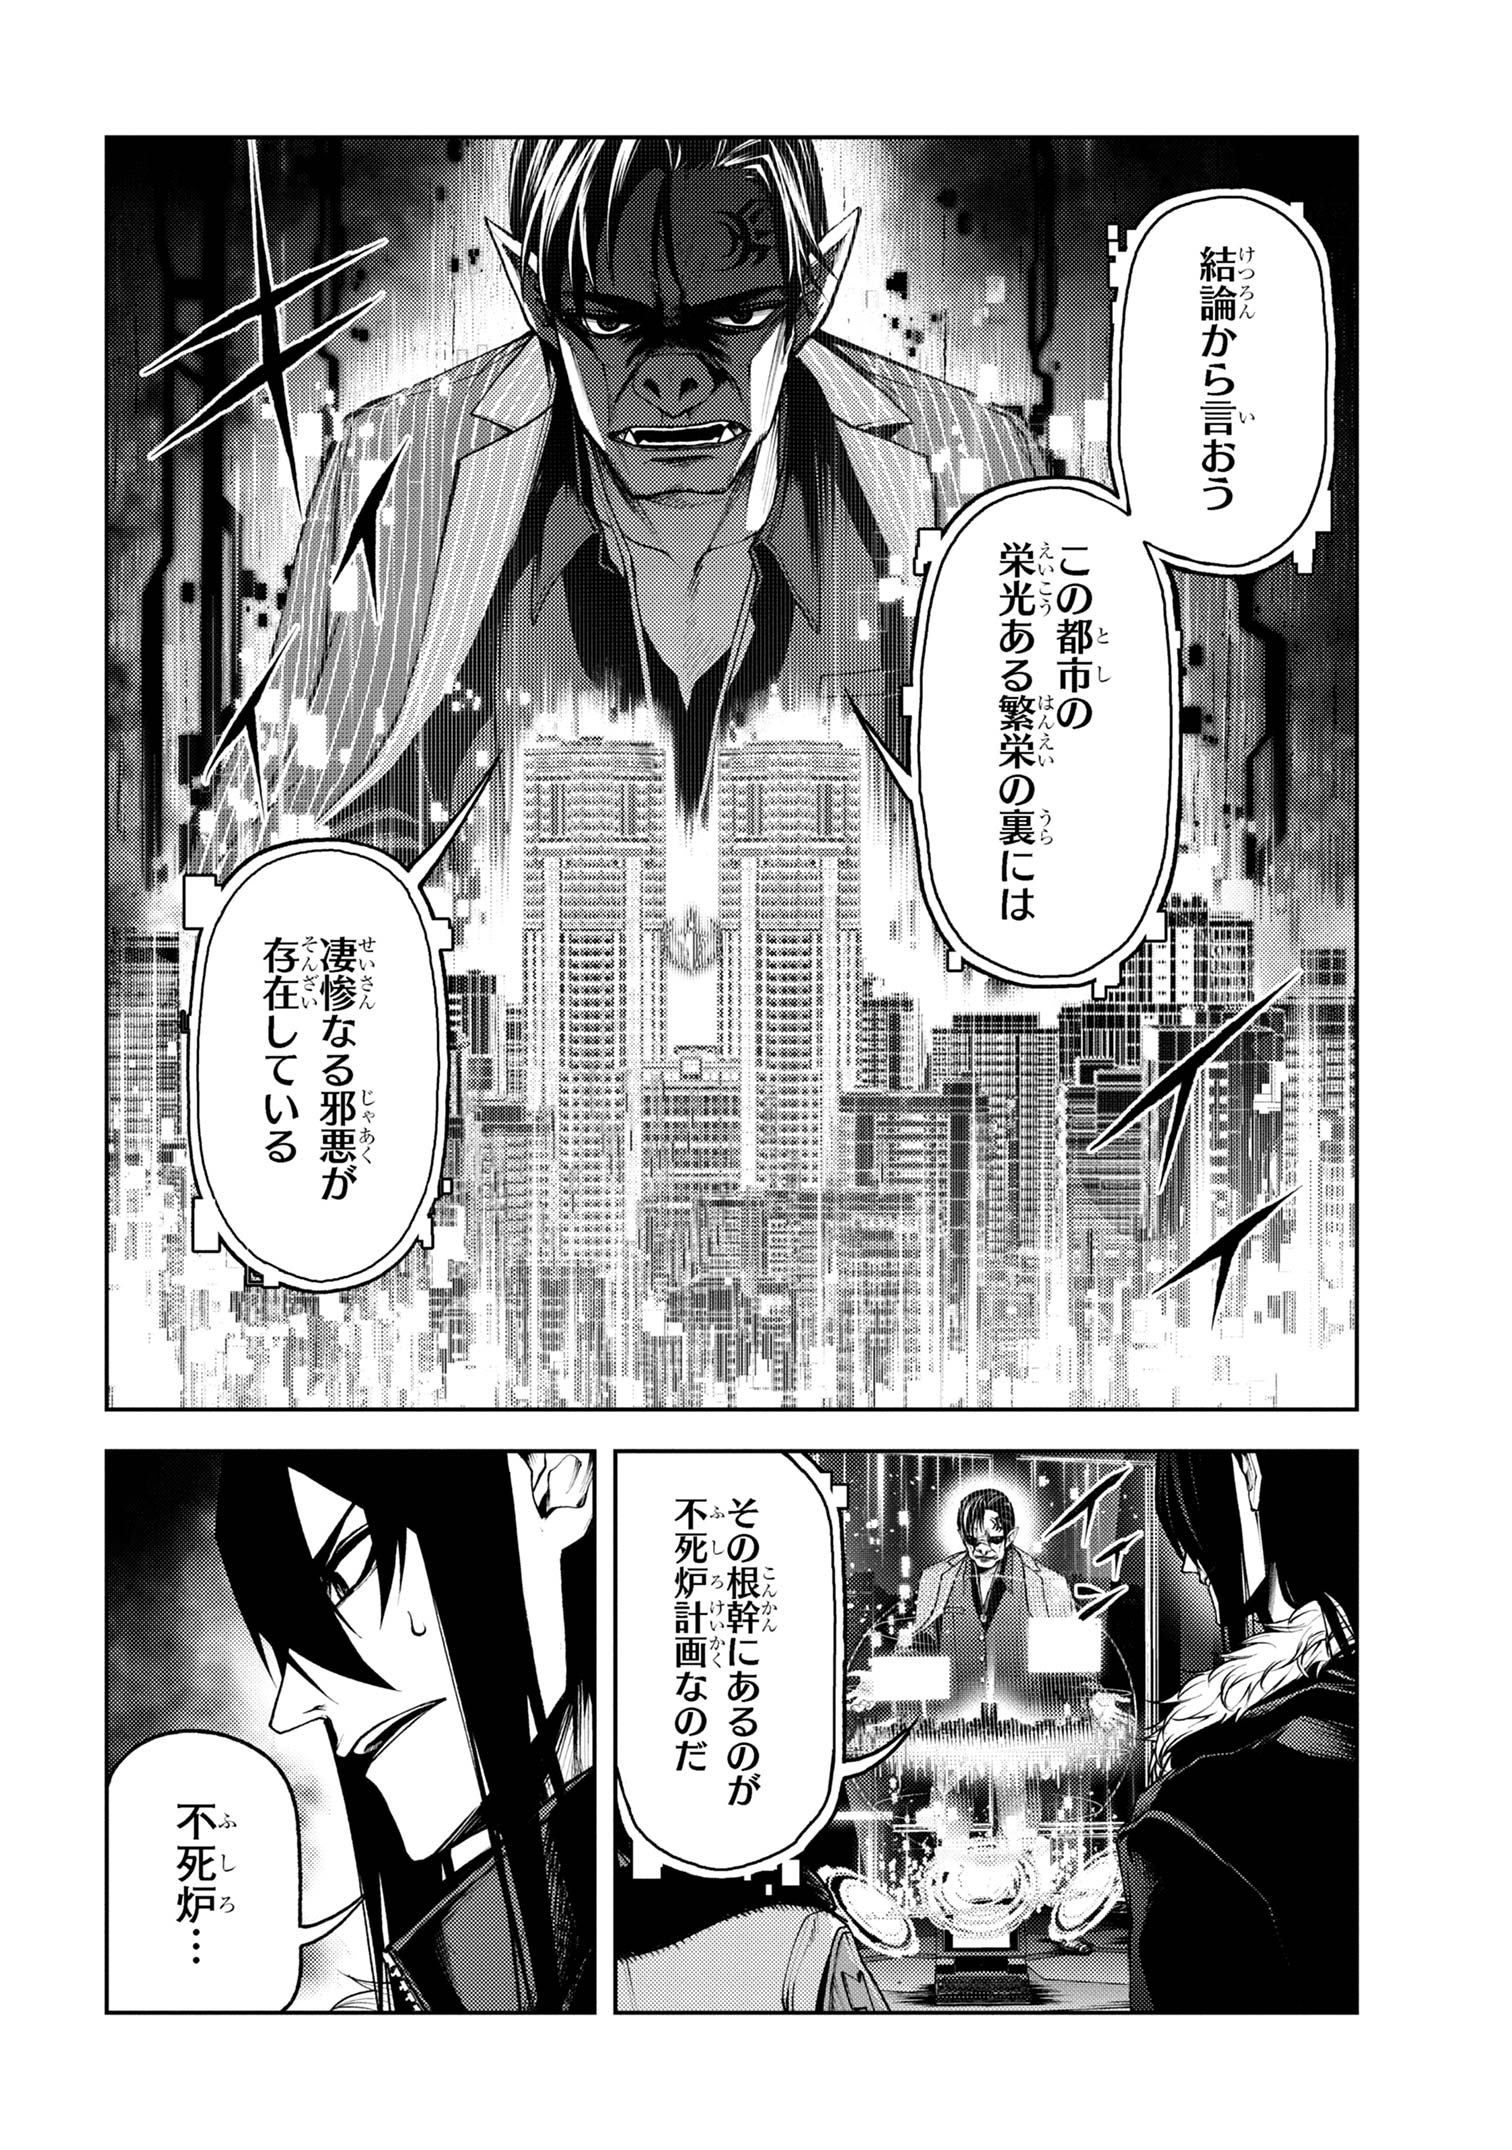 Maou 2099 - Chapter 7.2 - Page 1